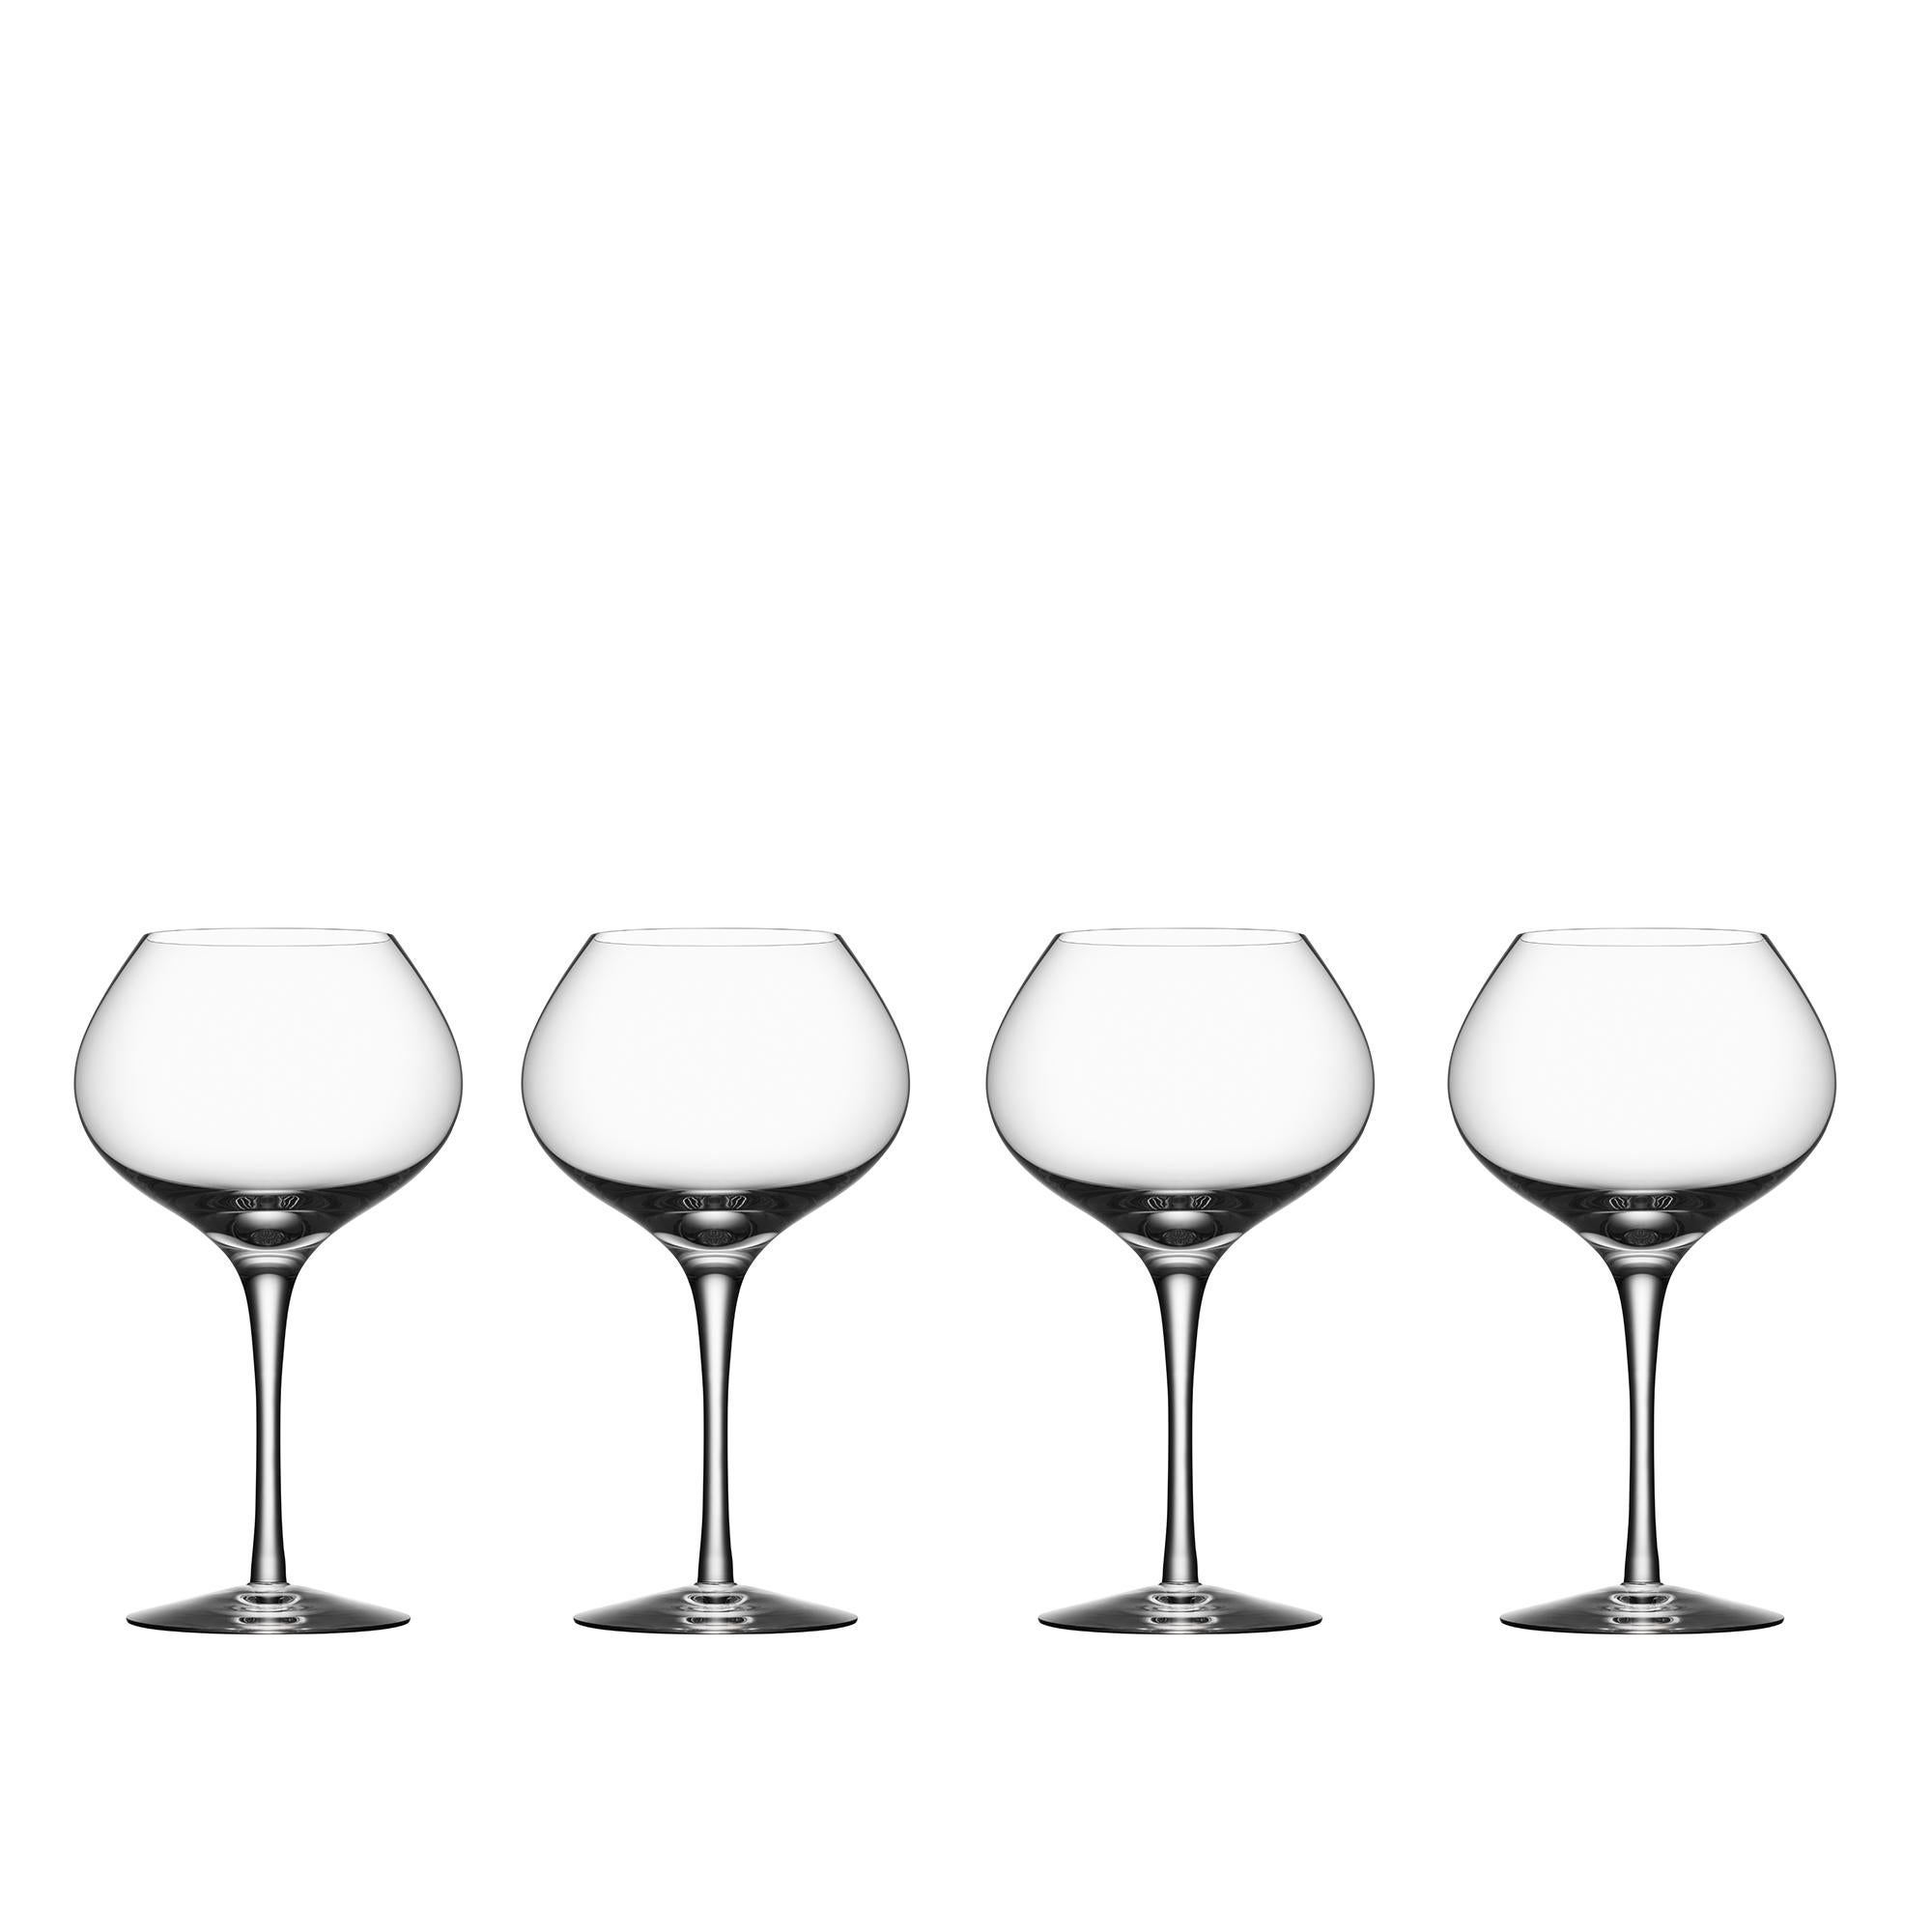 More Mature from Orrefors, which holds 16 oz, enhances the round, full aromas of red wine. Therefore, the stemware glass is intended for red wines with mature notes, whose fragrance and flavor emerge best in a low, slightly wider bowl. Designed by